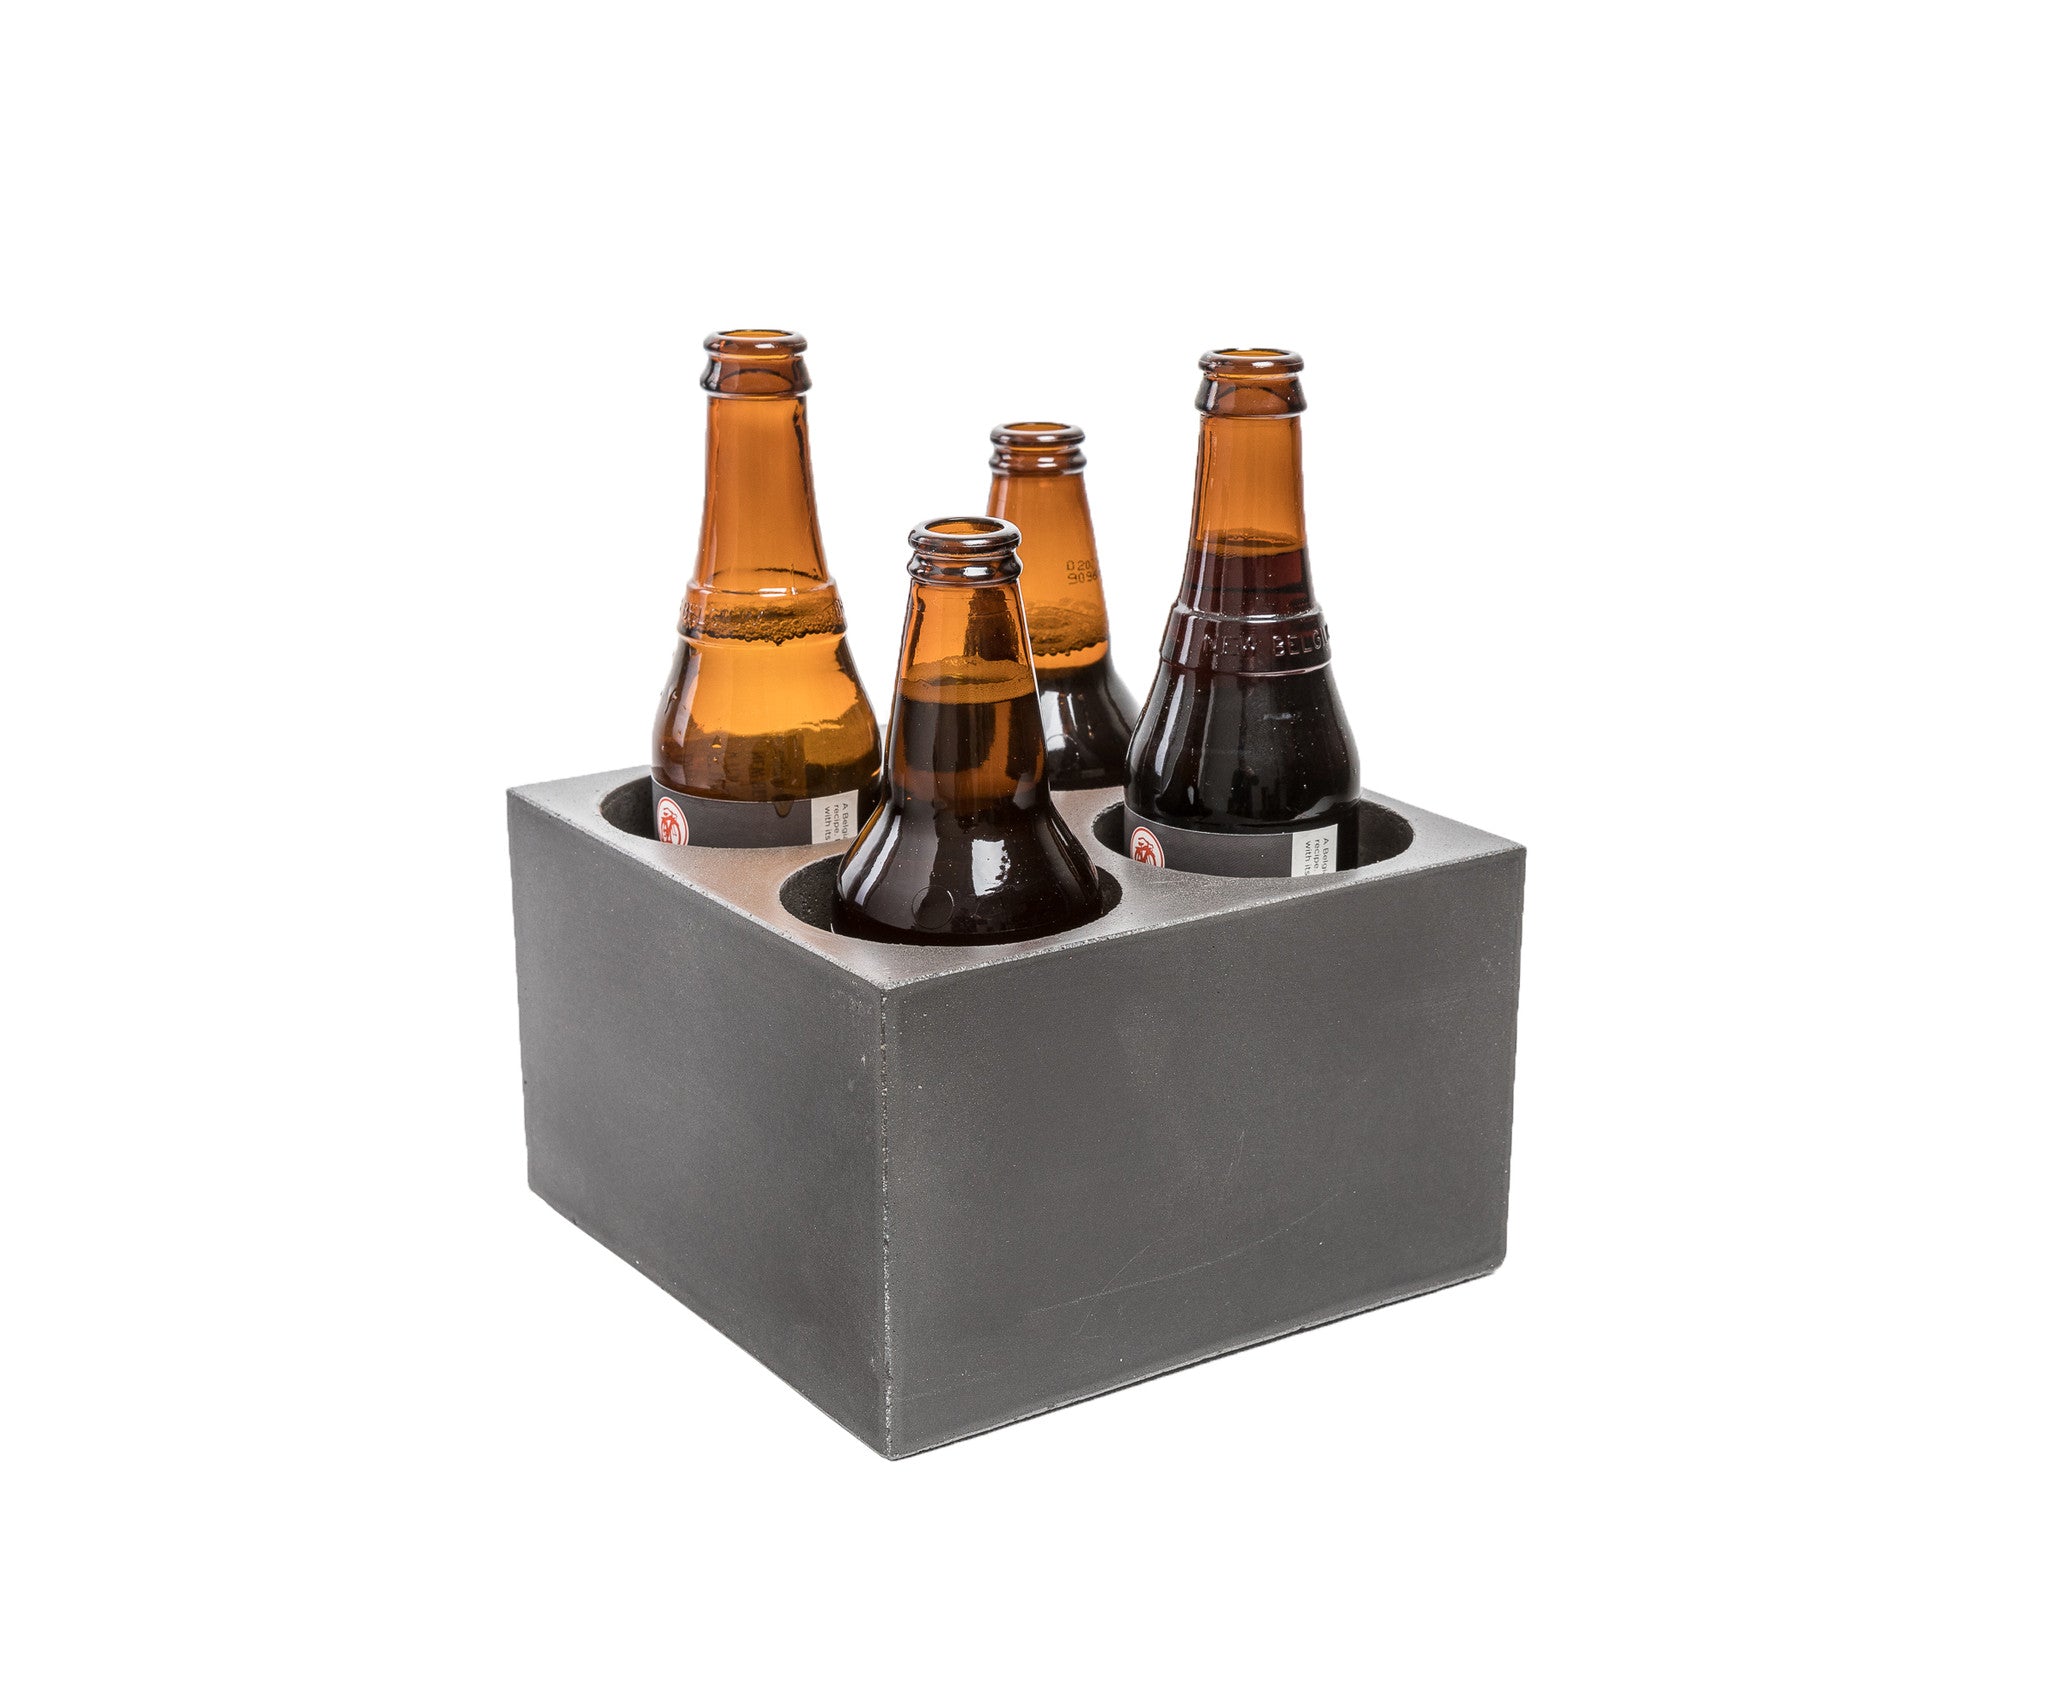 Concrete Beer Chiller (The Extrovert)